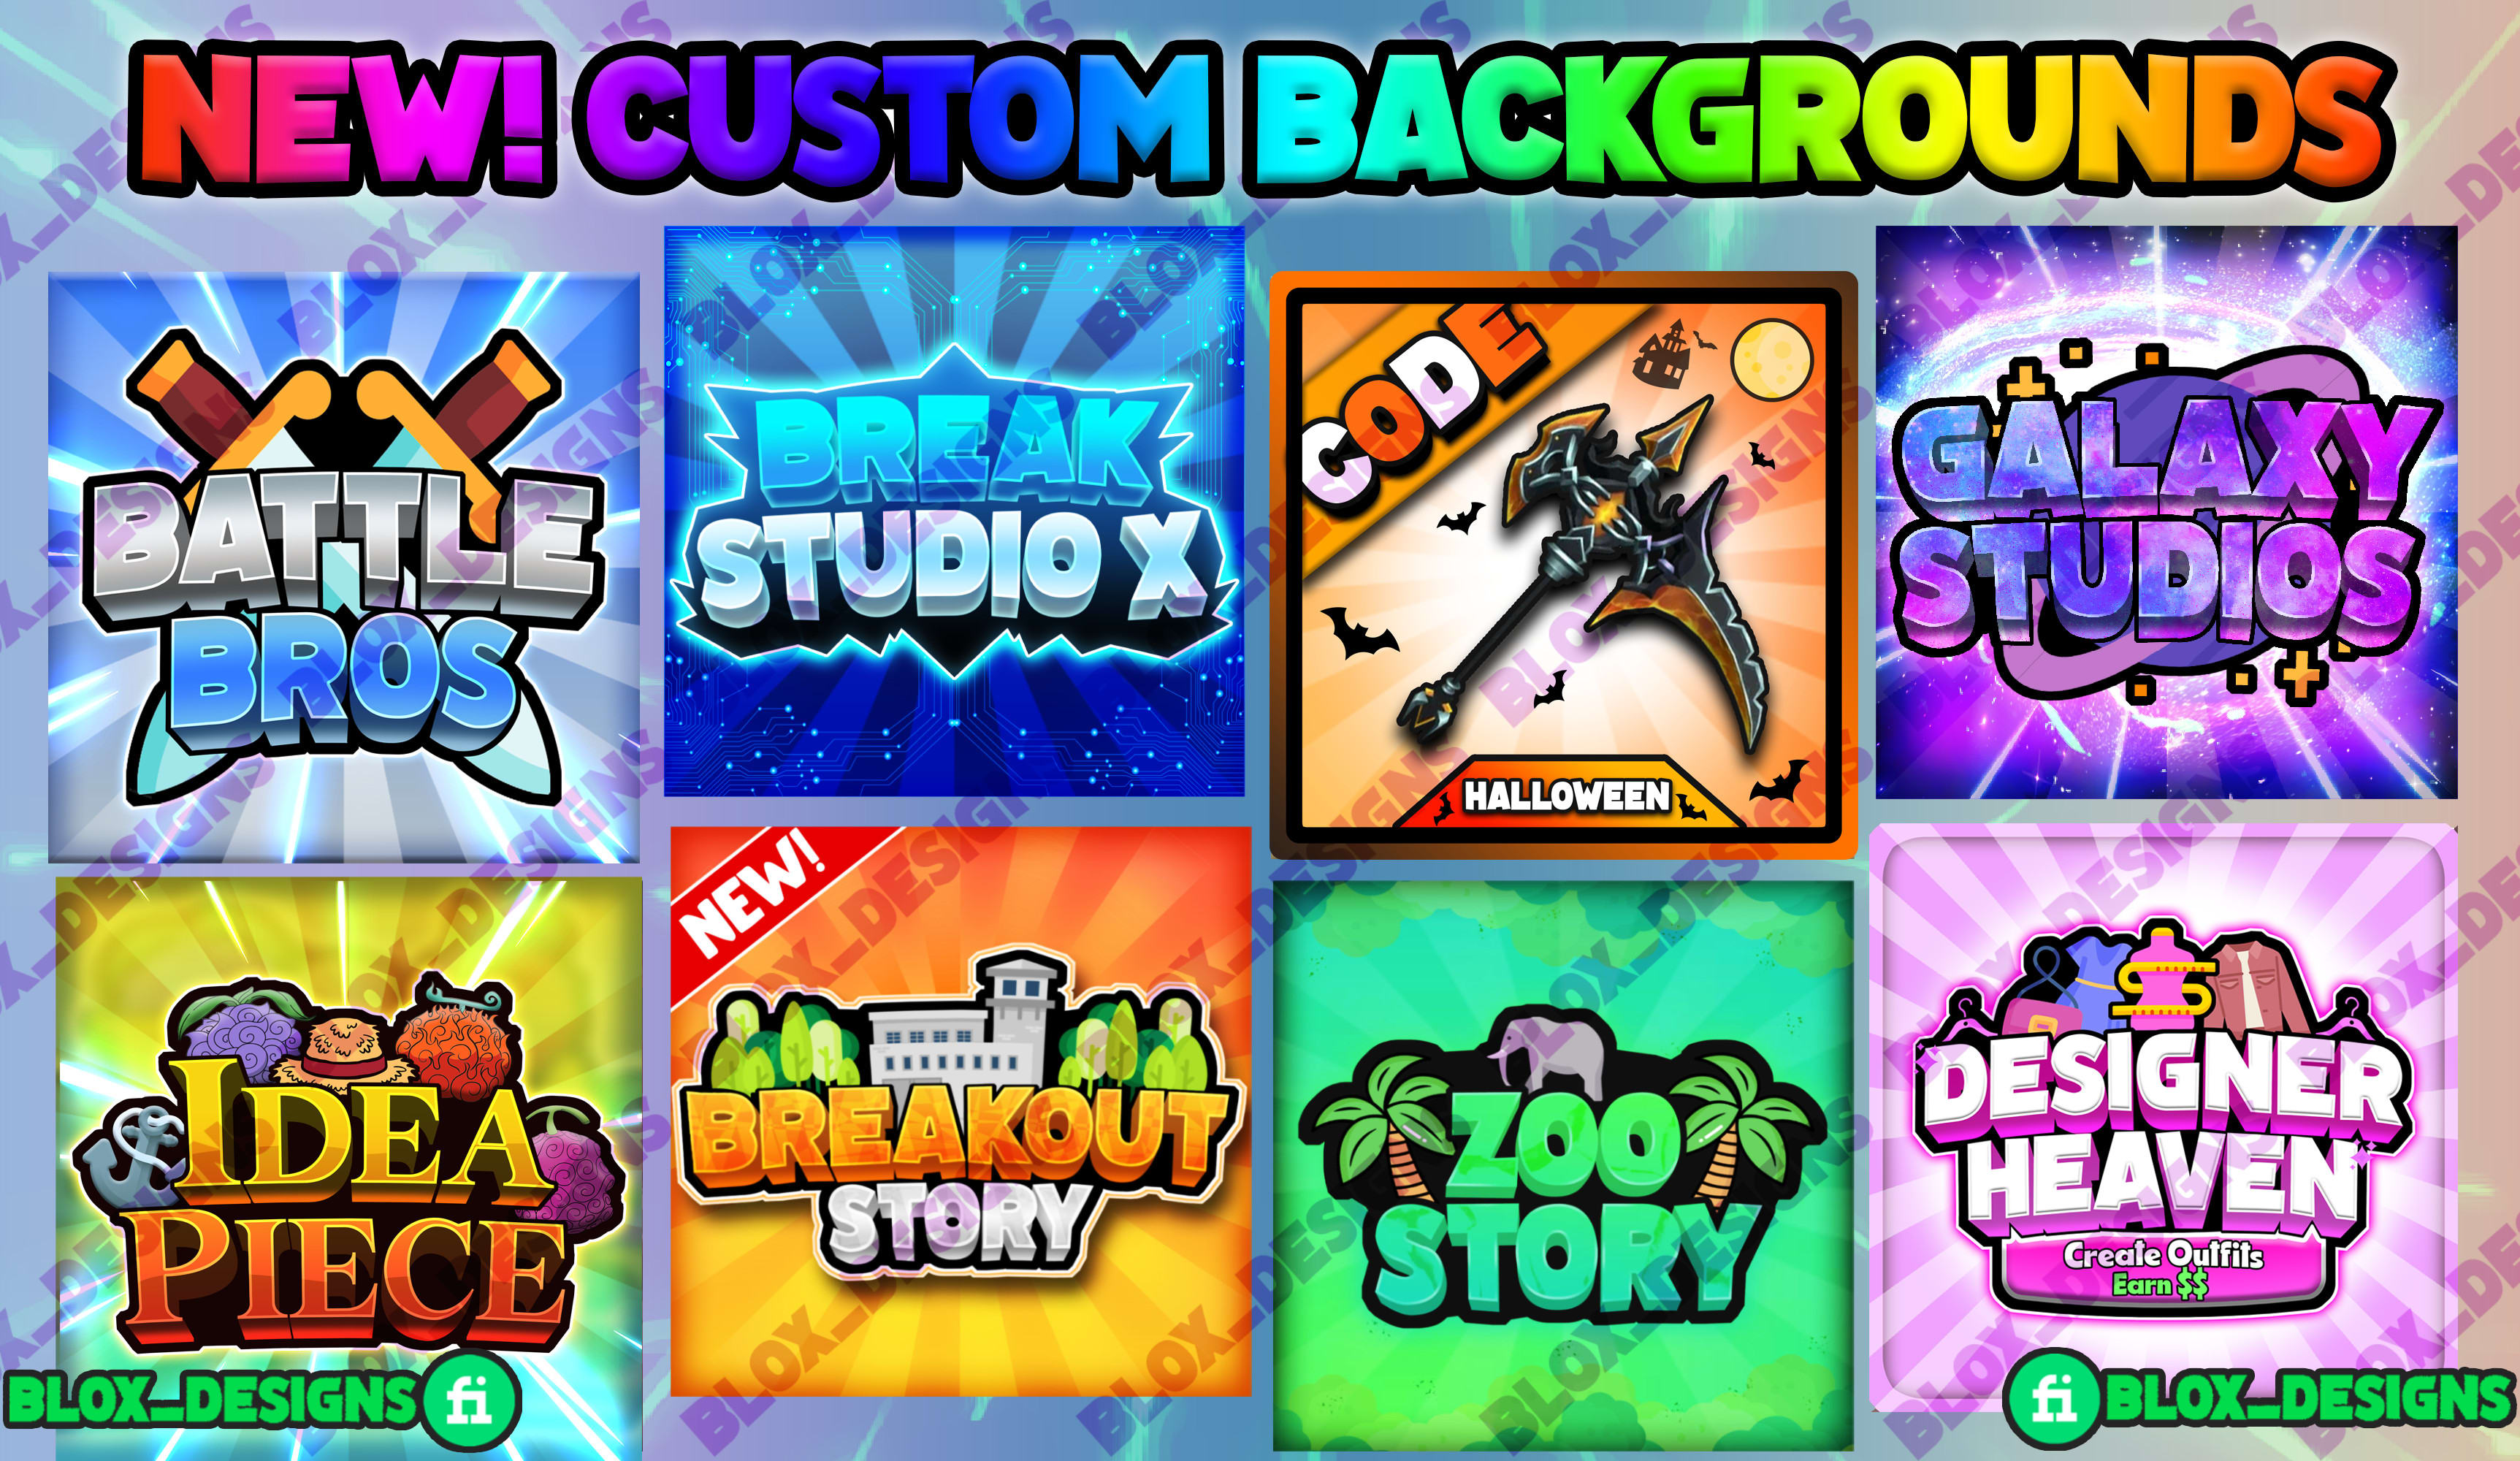 Design you a high quality roblox logo for your game or group by